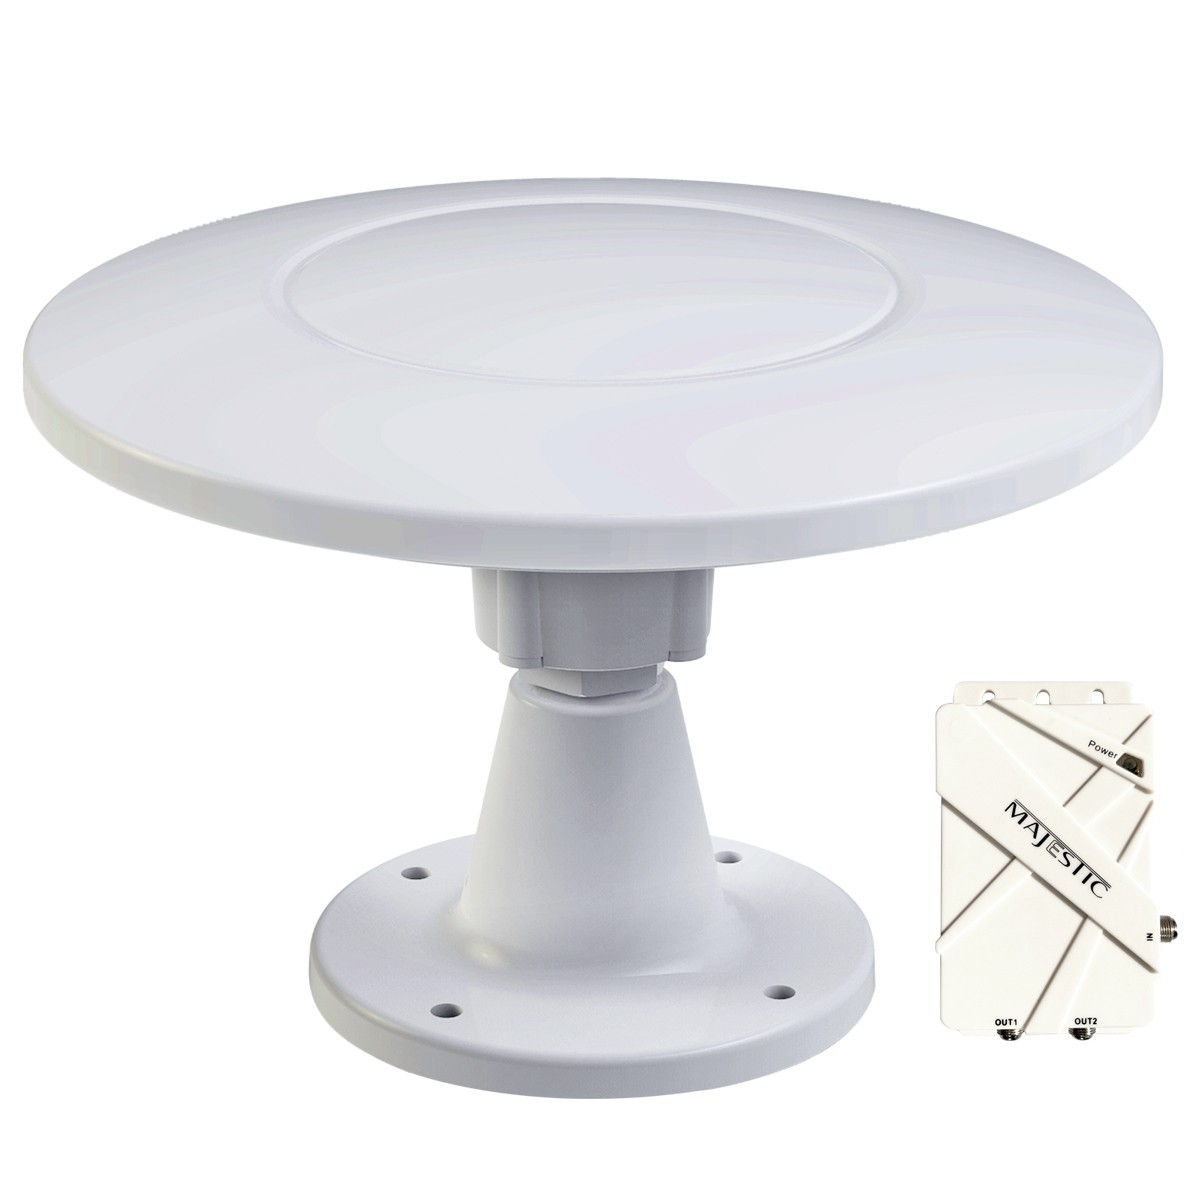 Majestic UFO X High Performance TV antenna - The Best Marine TV Antenna out there